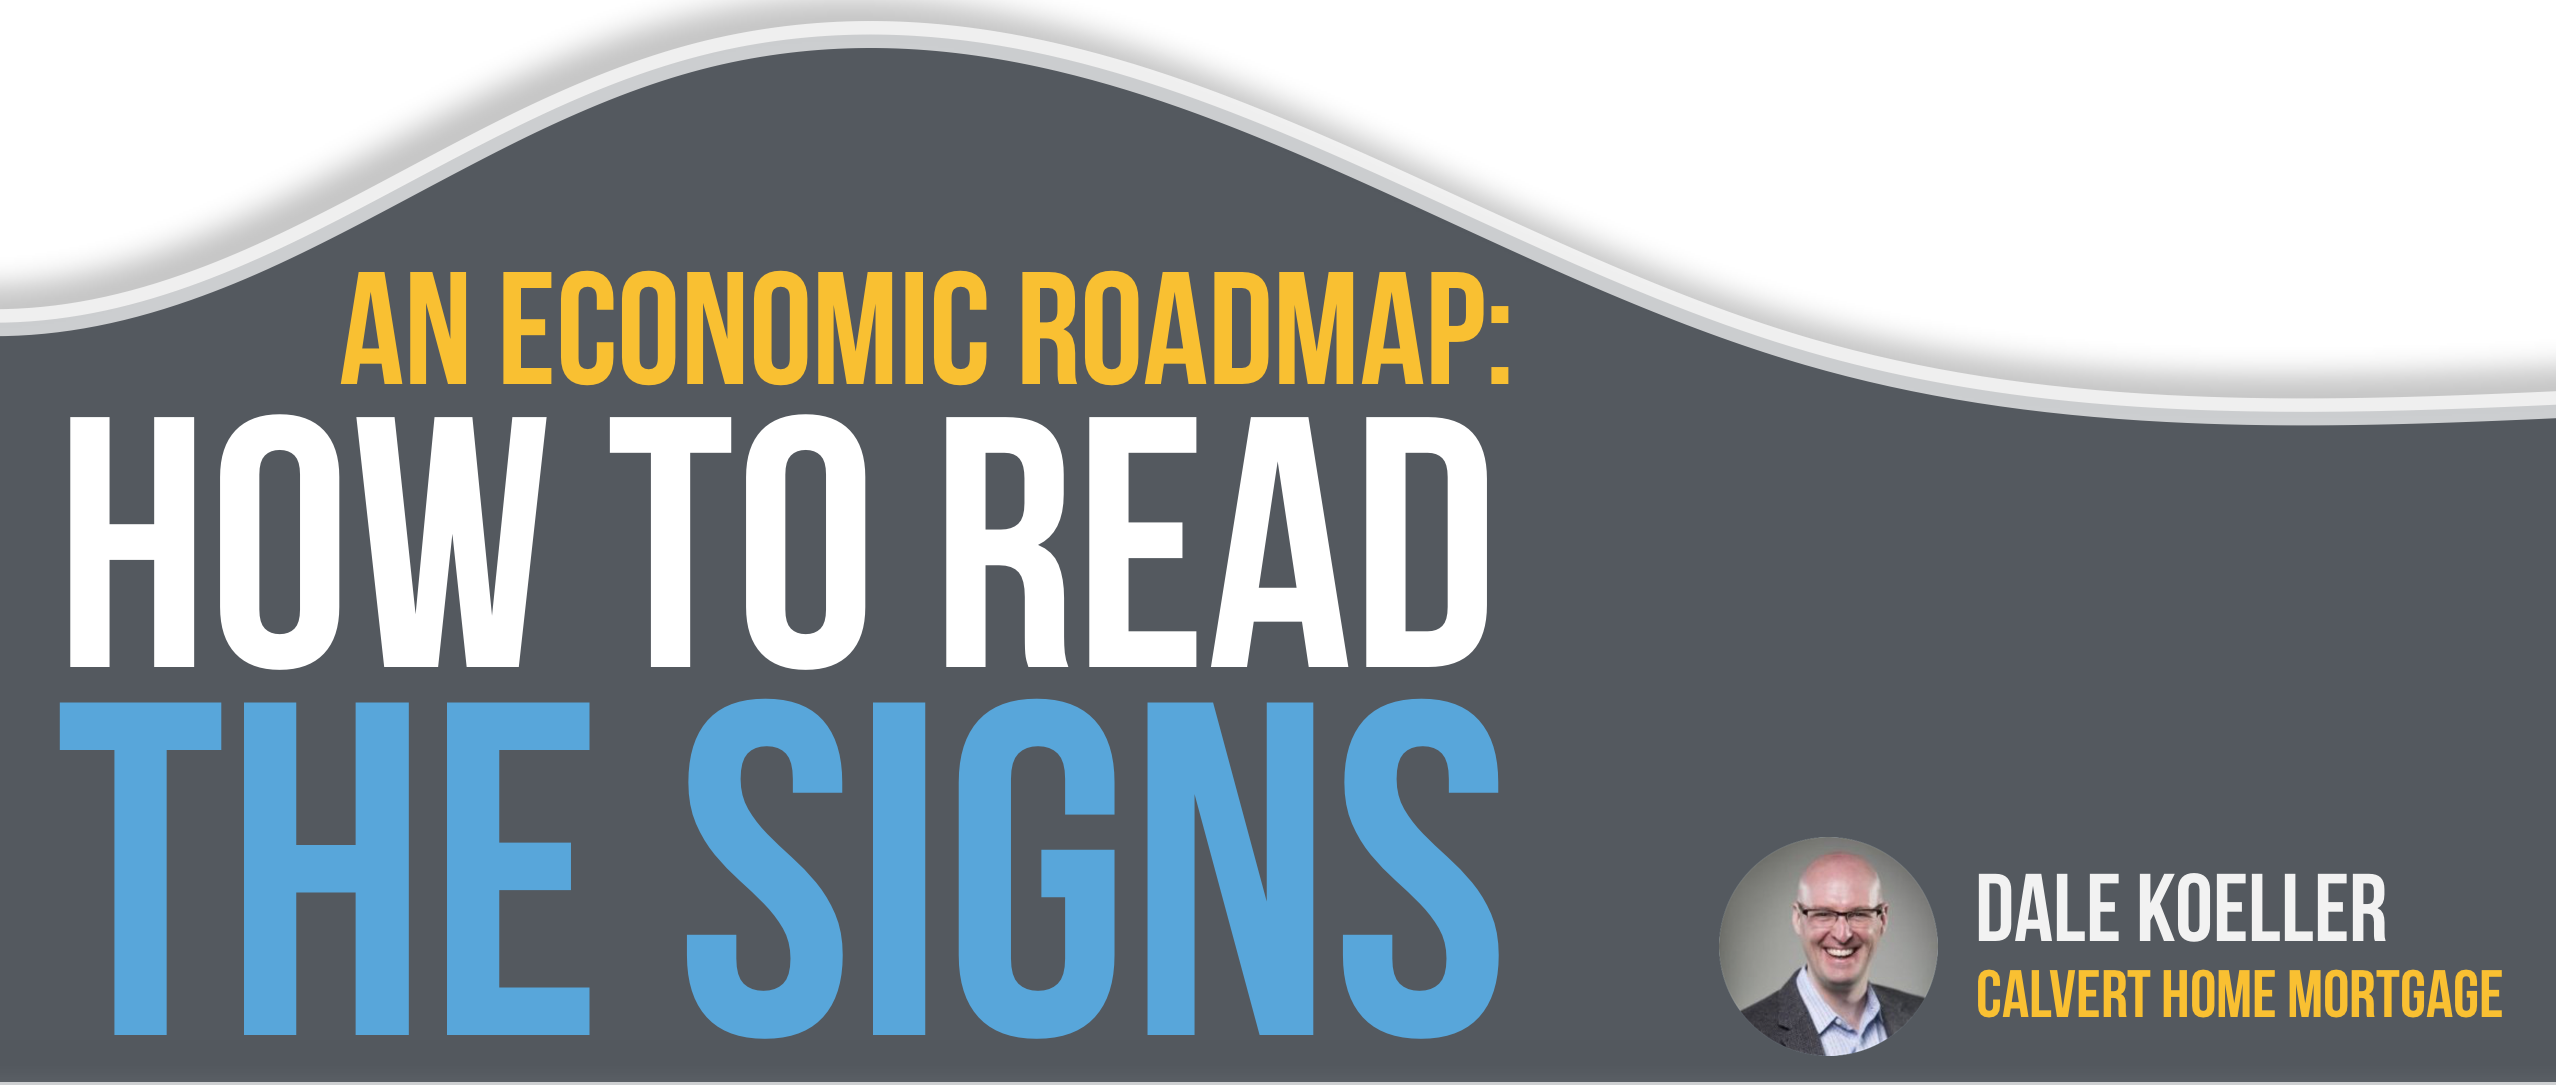 An Economic Roadmap: How to read the signs